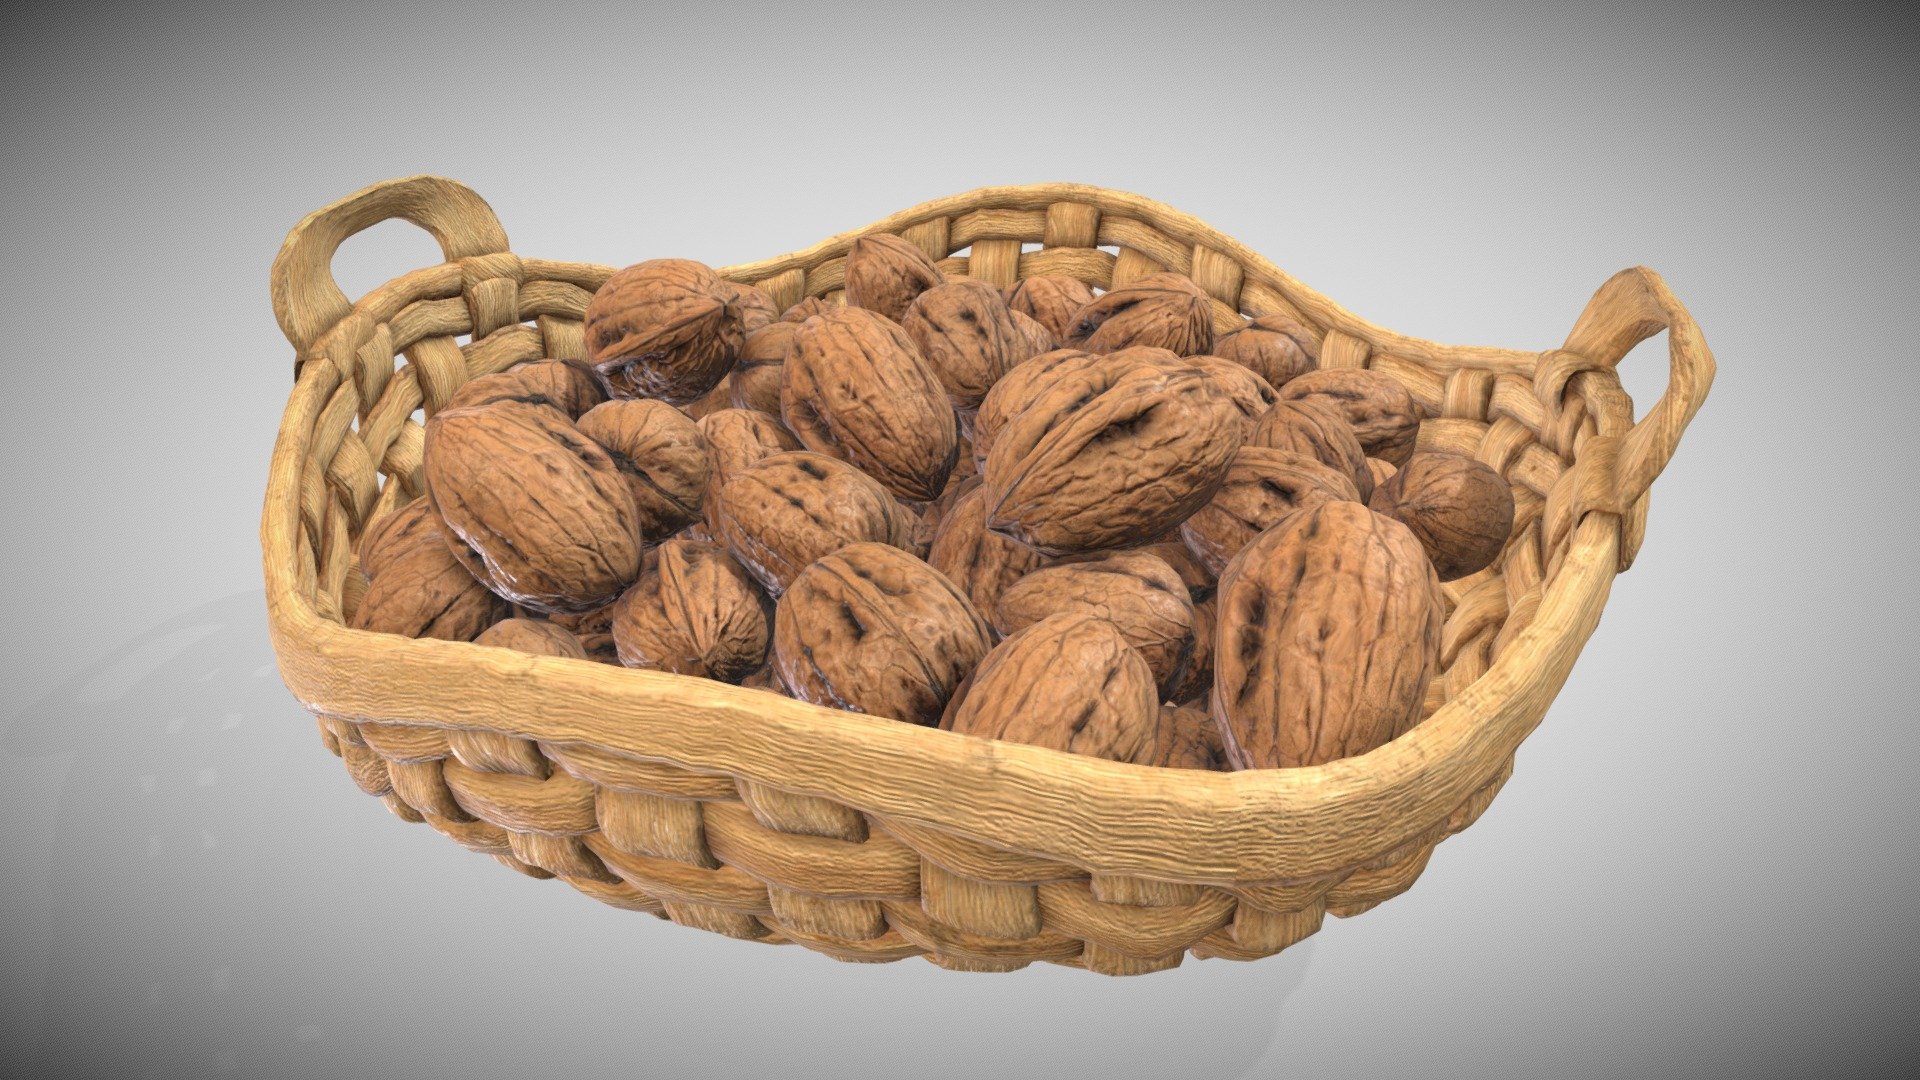 2 Material PBR Metalness (jpg)

Indipendent Ambient Occlusion for Basket - Nuts Basket - Cestyno_Noci - Buy Royalty Free 3D model by Francesco Coldesina (@topfrank2013) 3d model